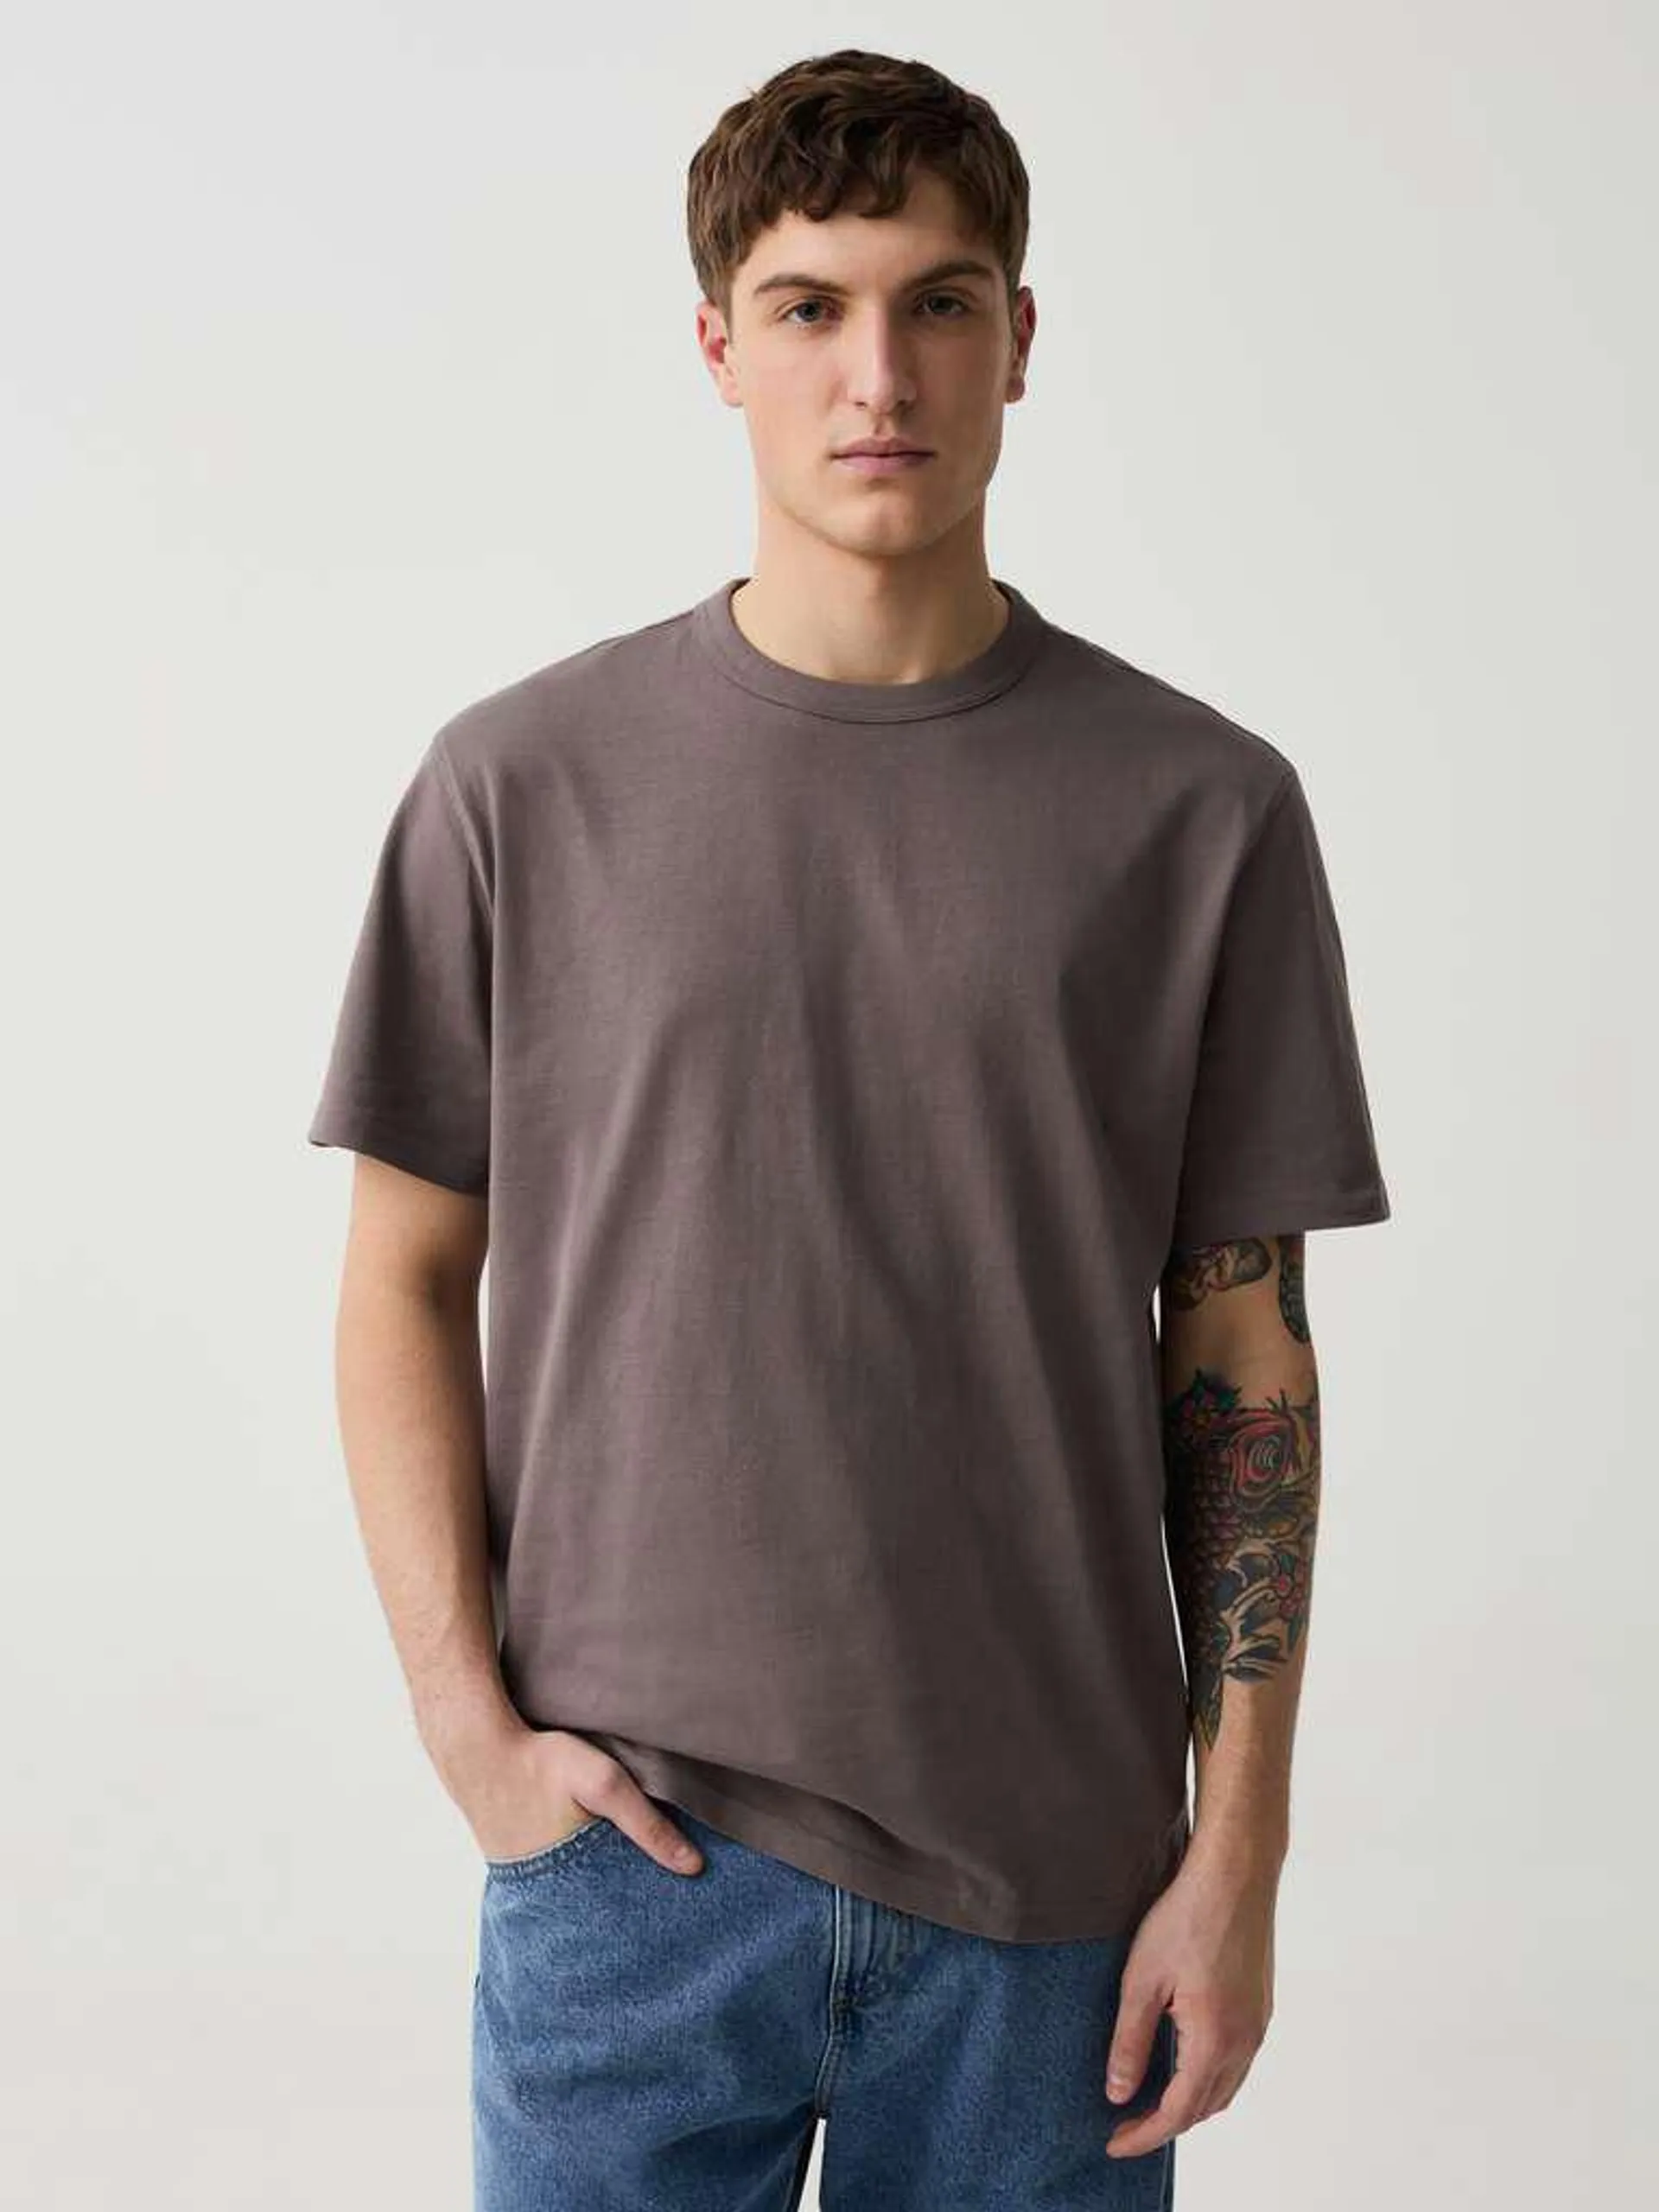 Slate Grey Relaxed-fit T-shirt in cotton